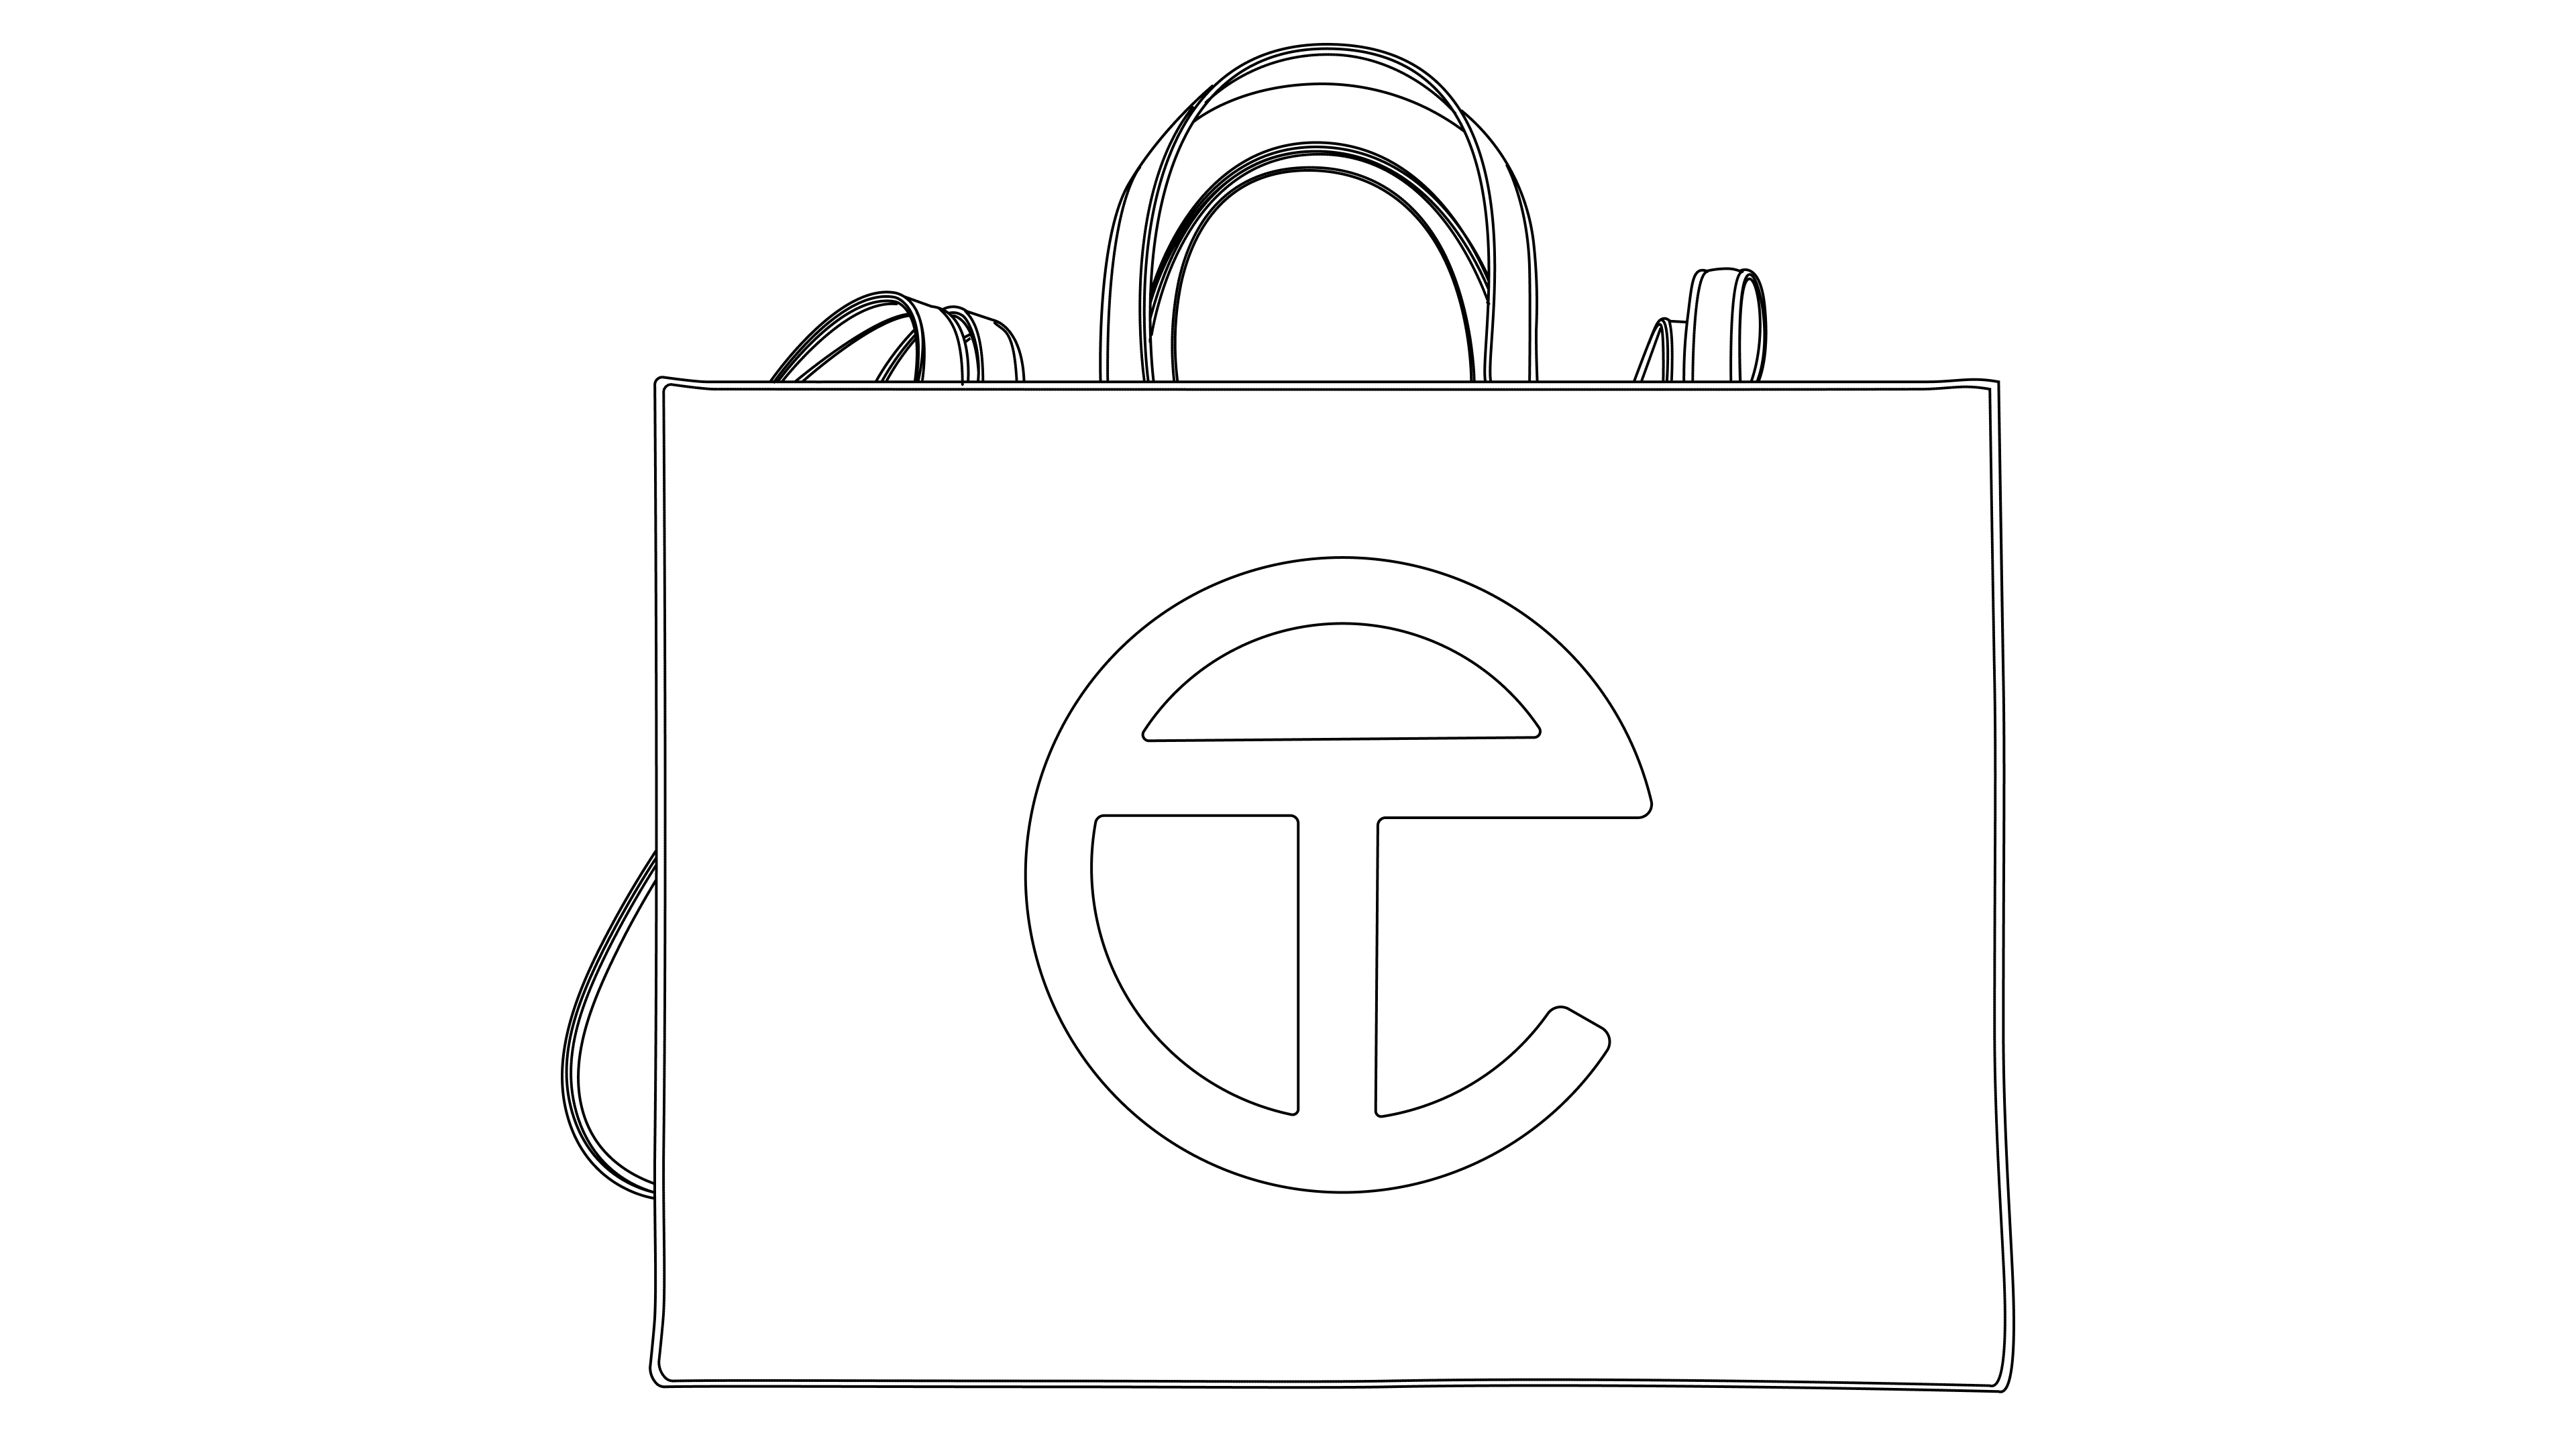 Telfar's it Shopping Bag Has Helped the Brand Boost Sales by